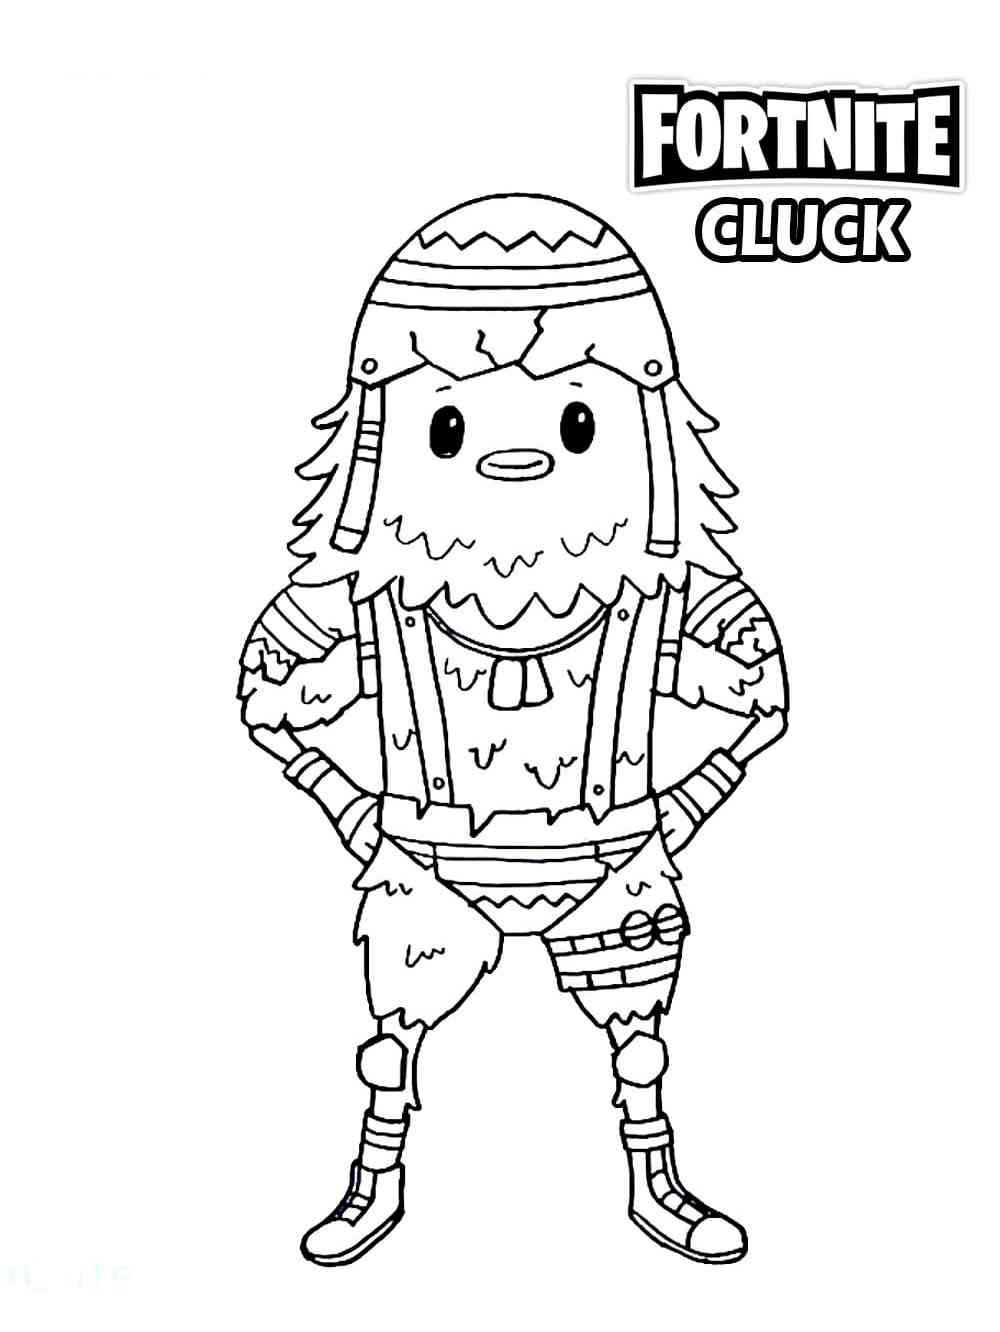 Little Cluck Fortnite coloring page